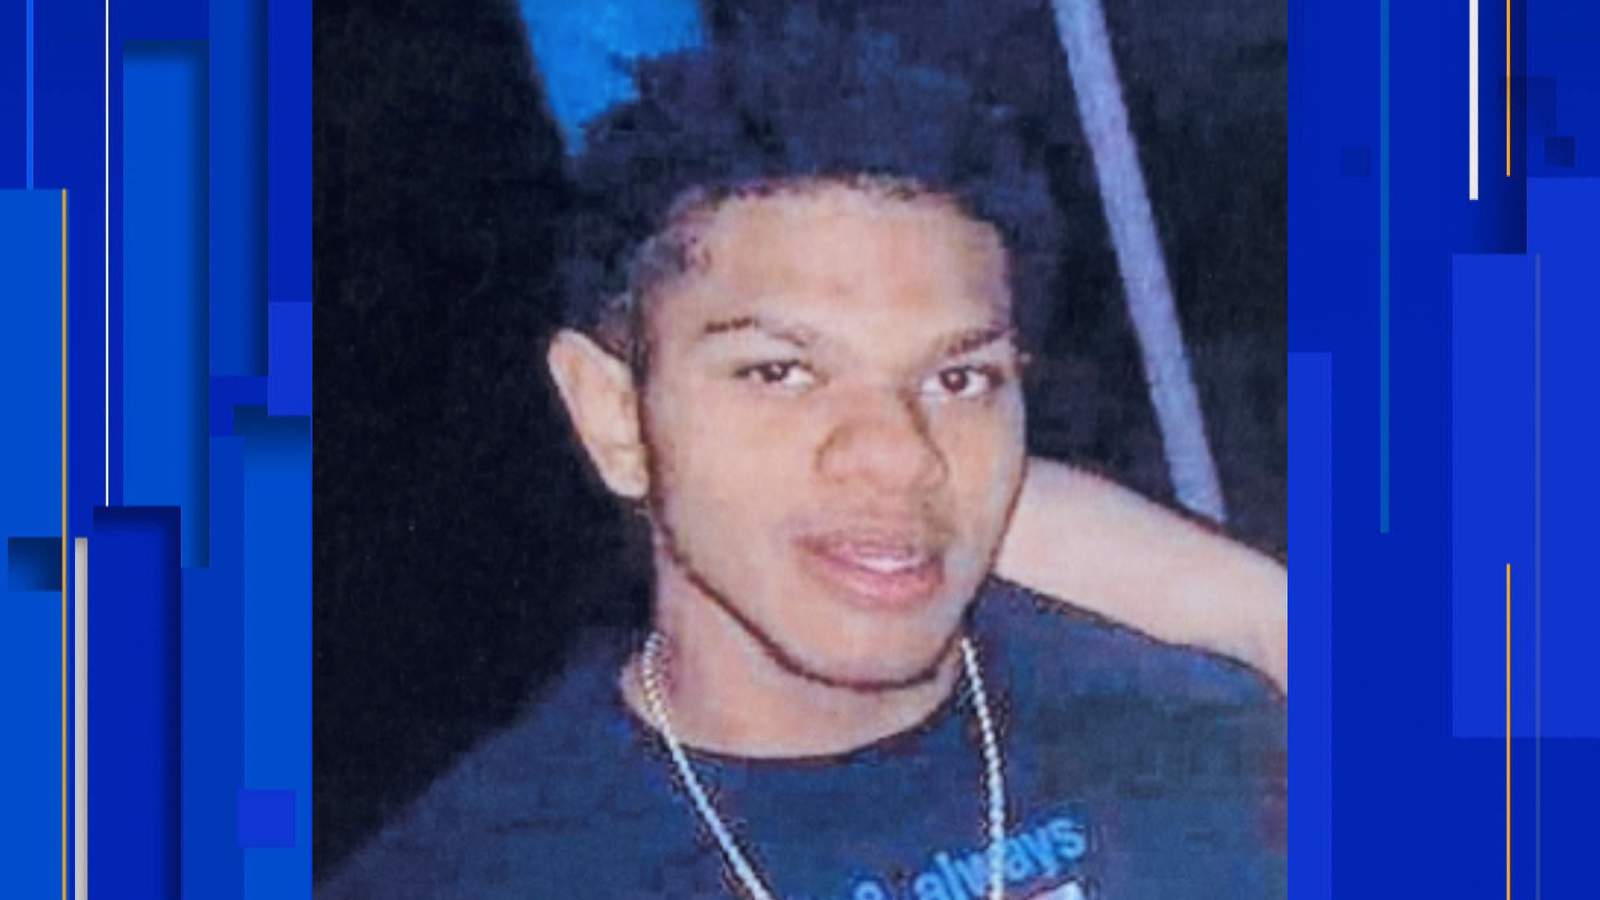 Detroit police say missing 17-year-old left home after completing chores, did not return